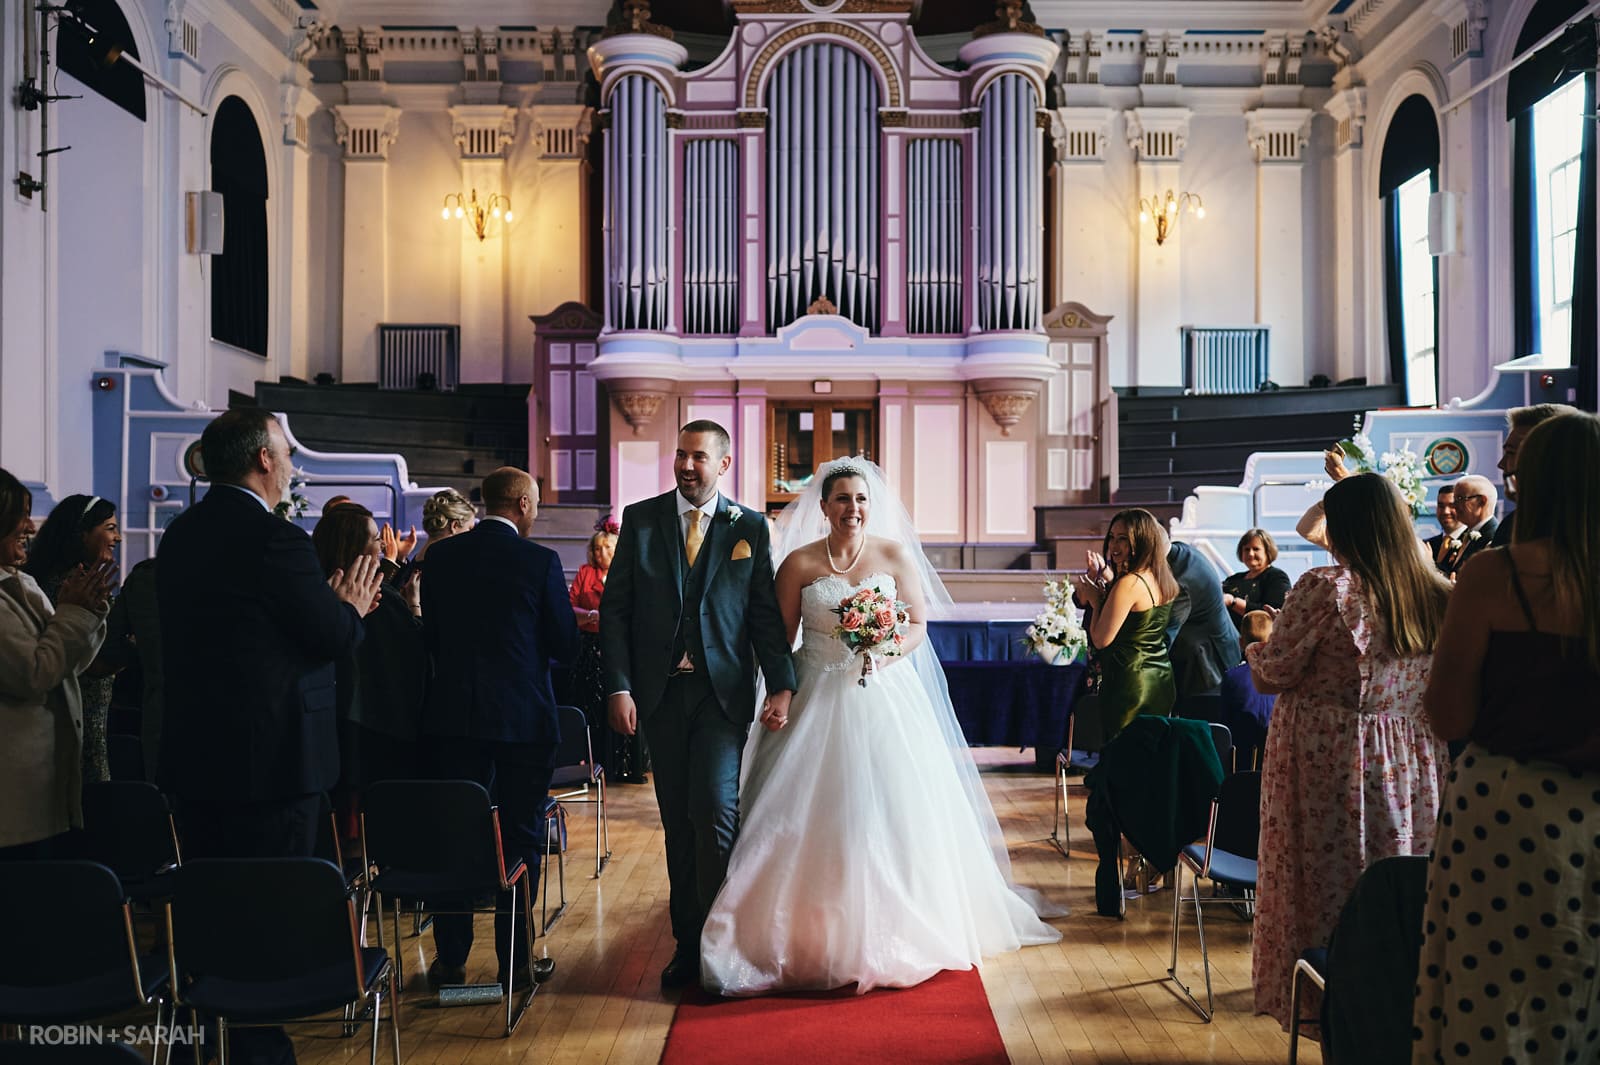 Bride and groom walk up aisle after getting married at Kidderminster Town Hall, as guests clap and cheer